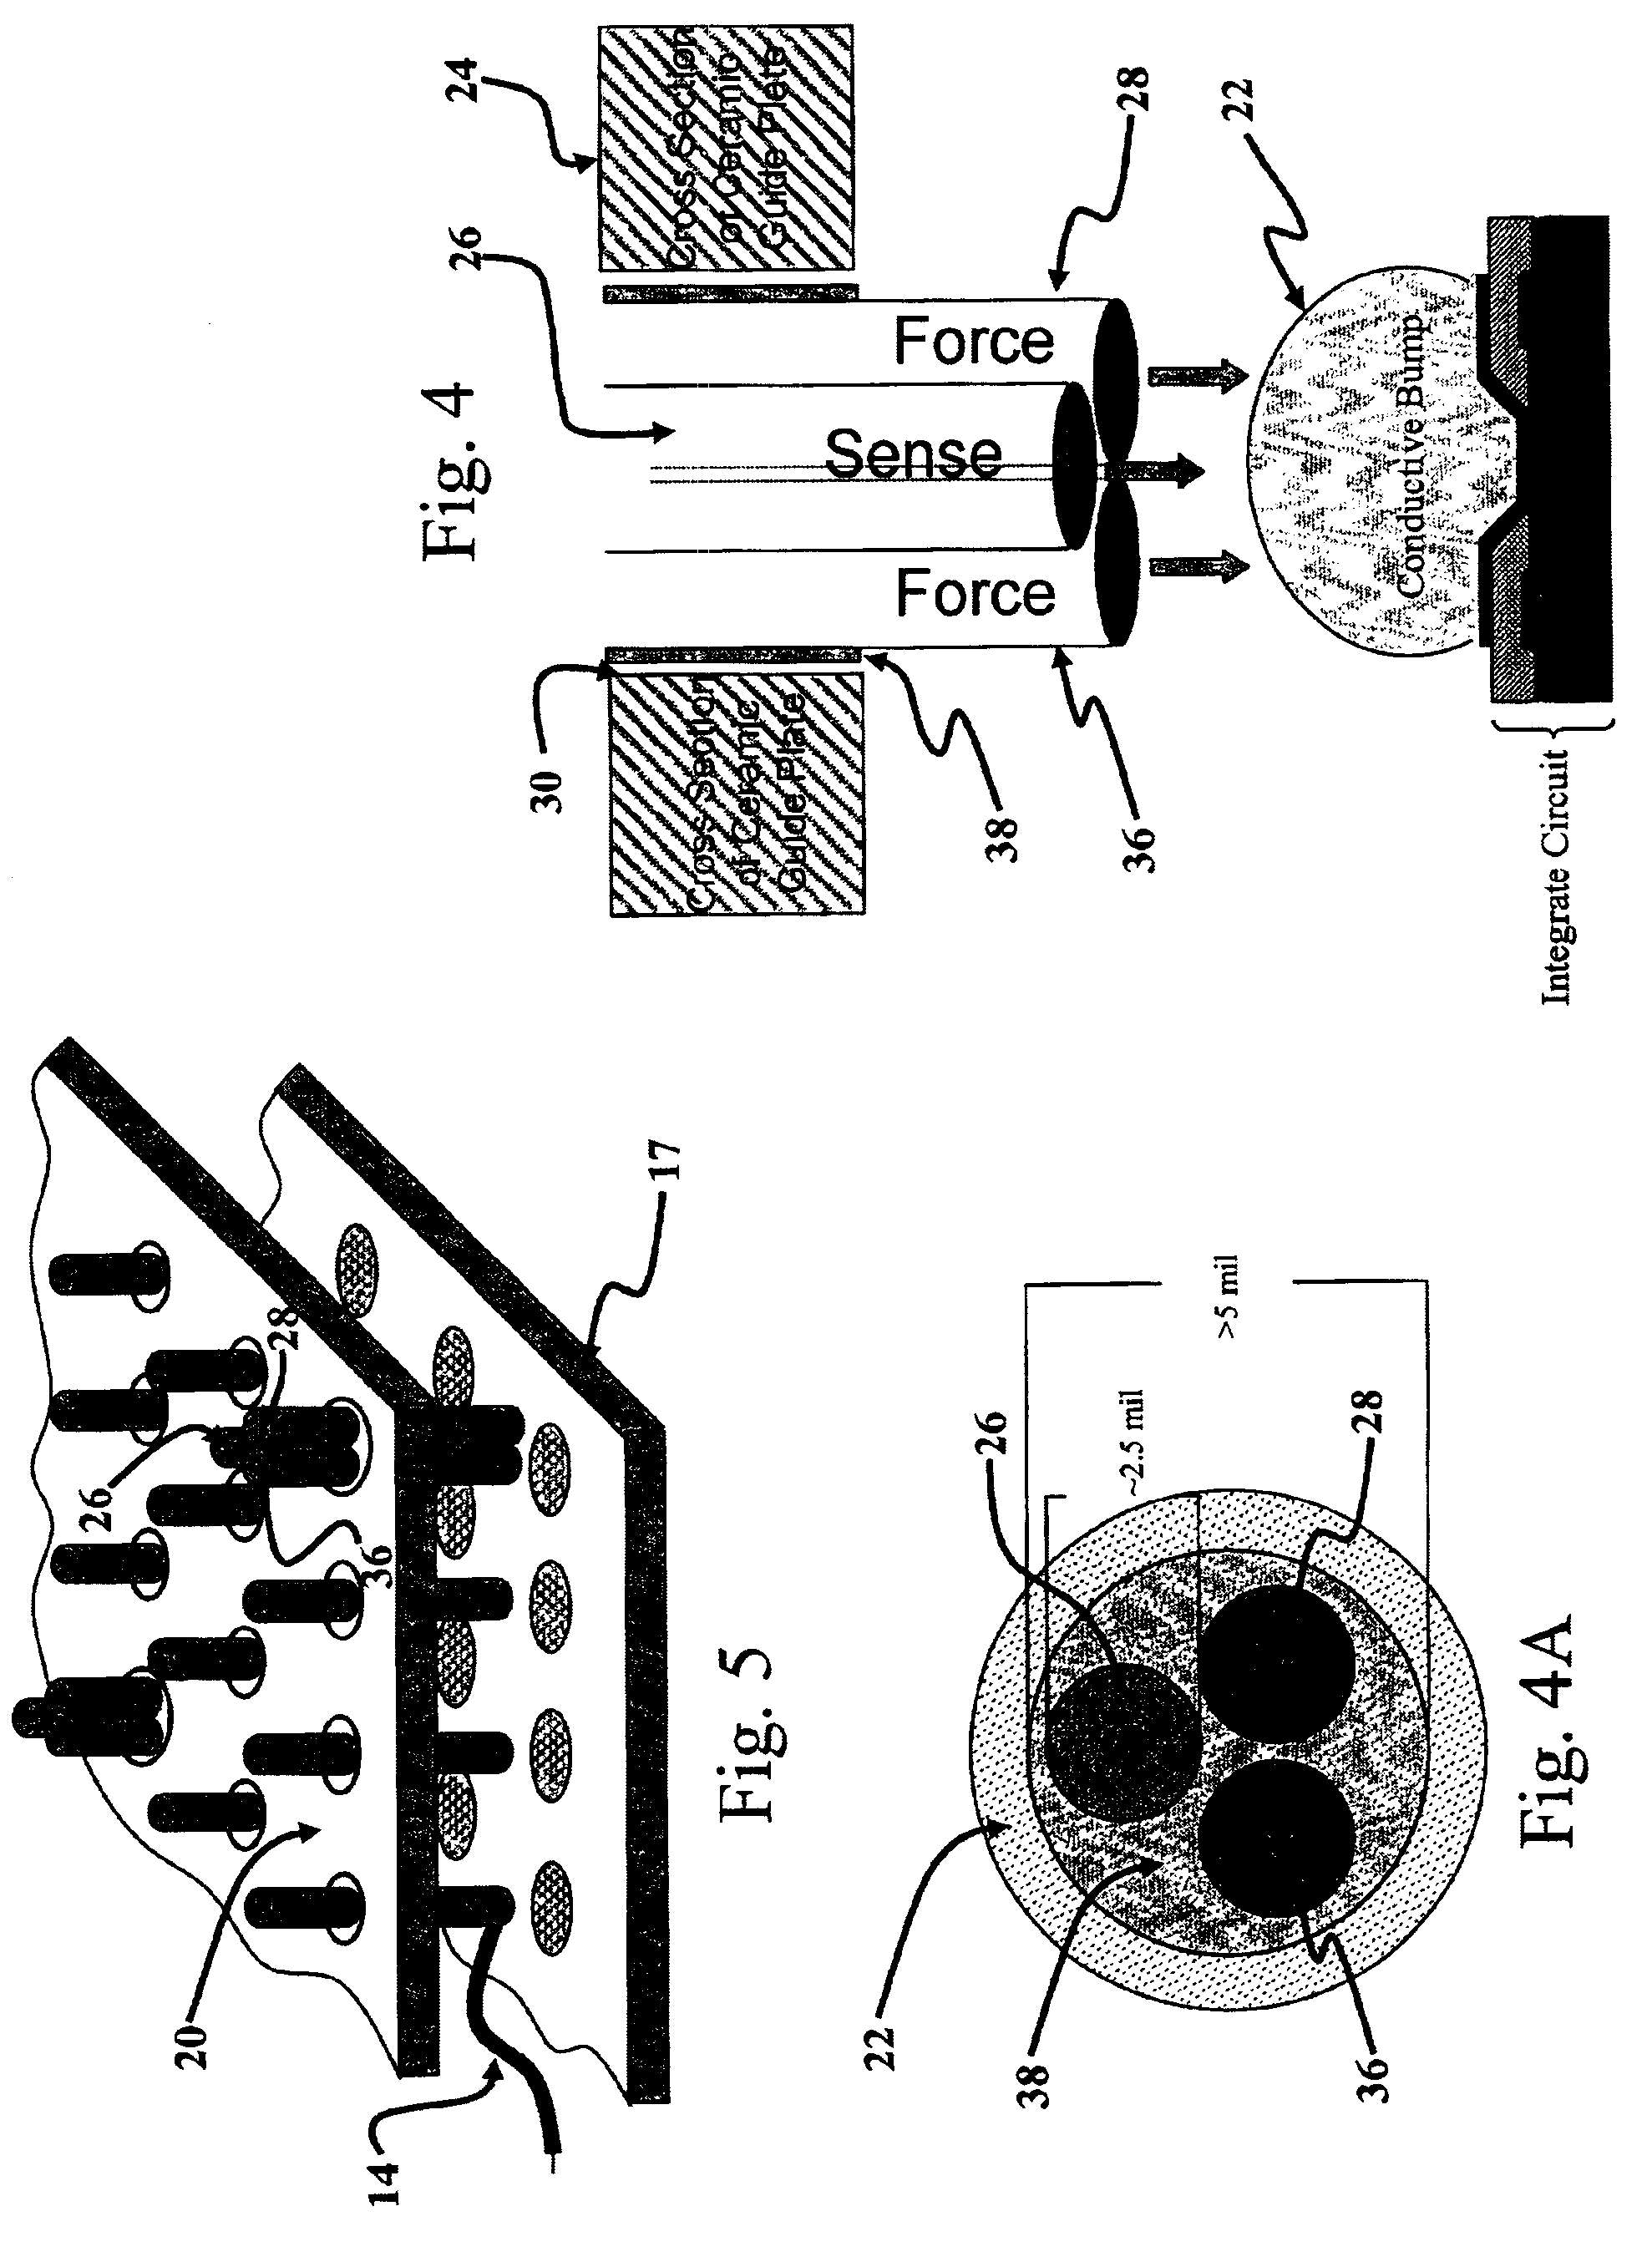 Multiple contact vertical probe solution enabling Kelvin connection benefits for conductive bump probing